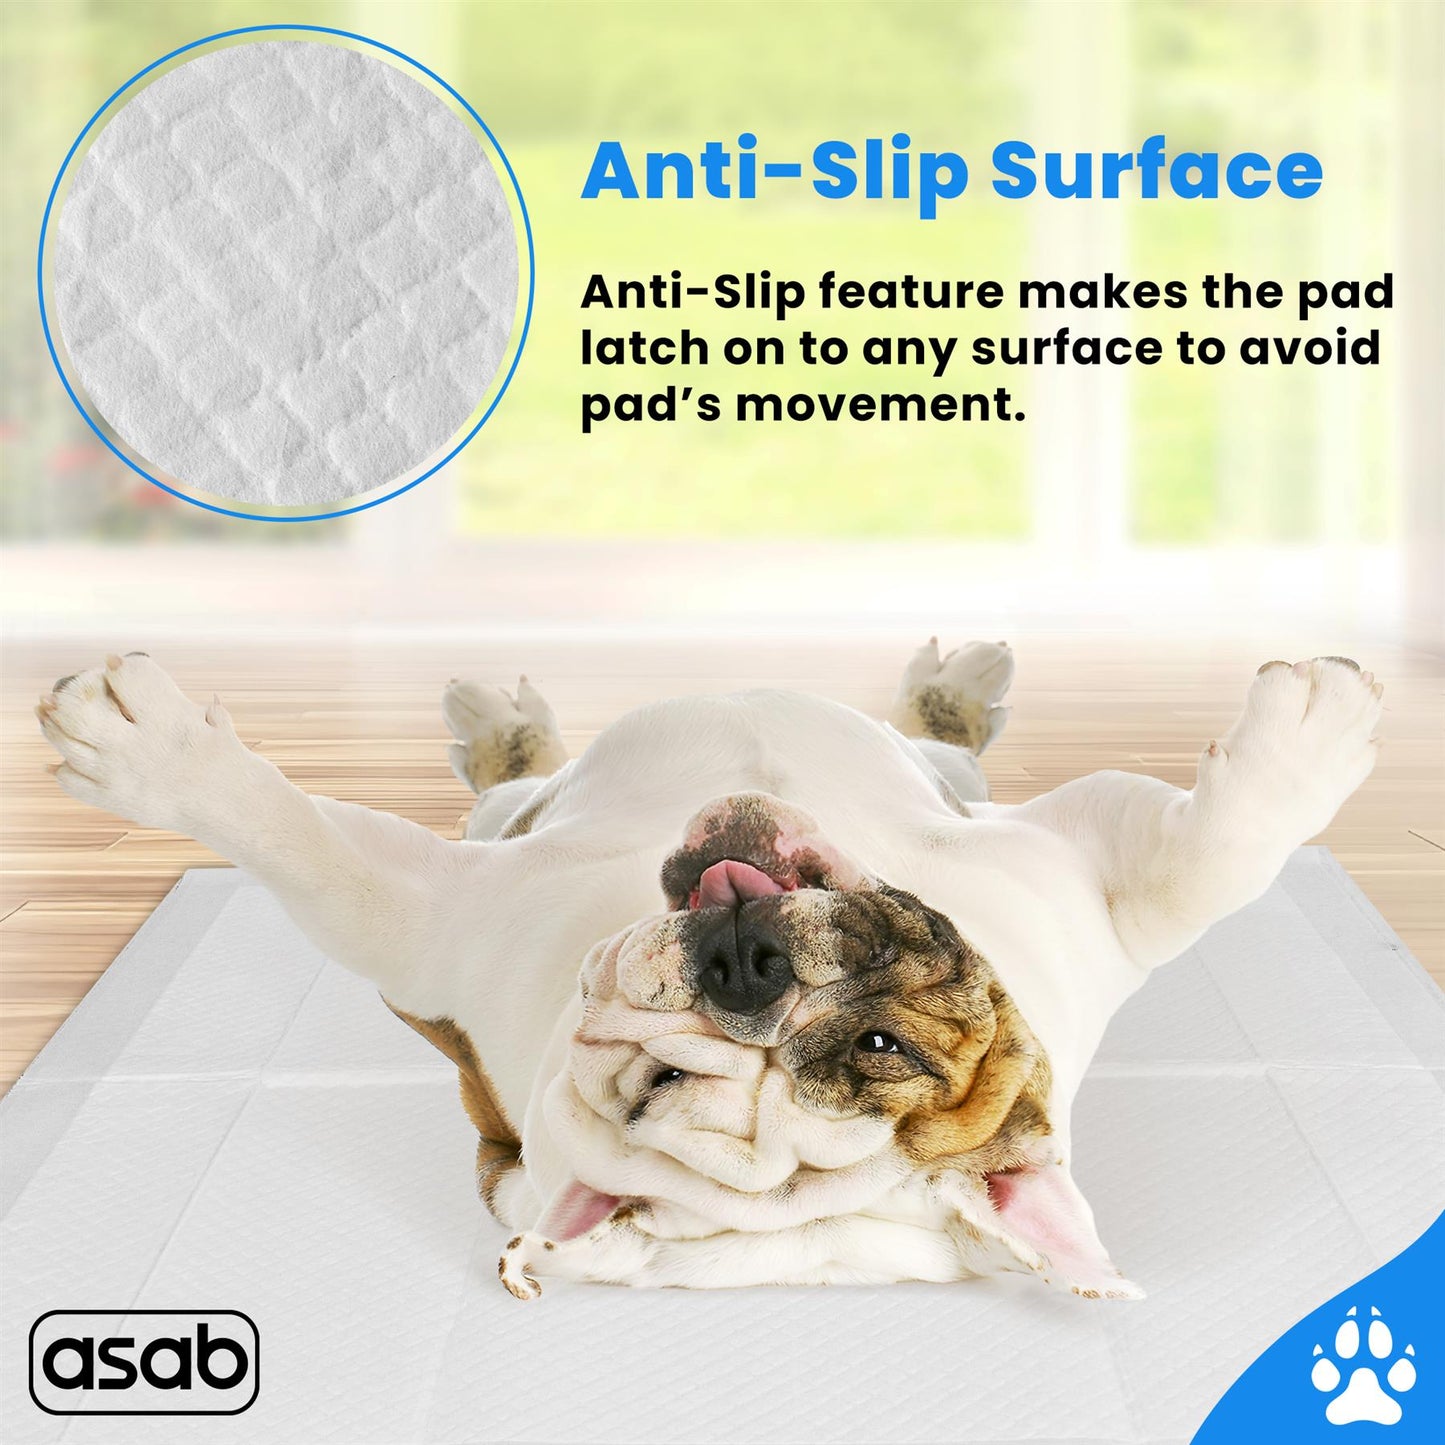 Train Your Pet Dog With Highly Absorbent And Leak-Proof Training Pads